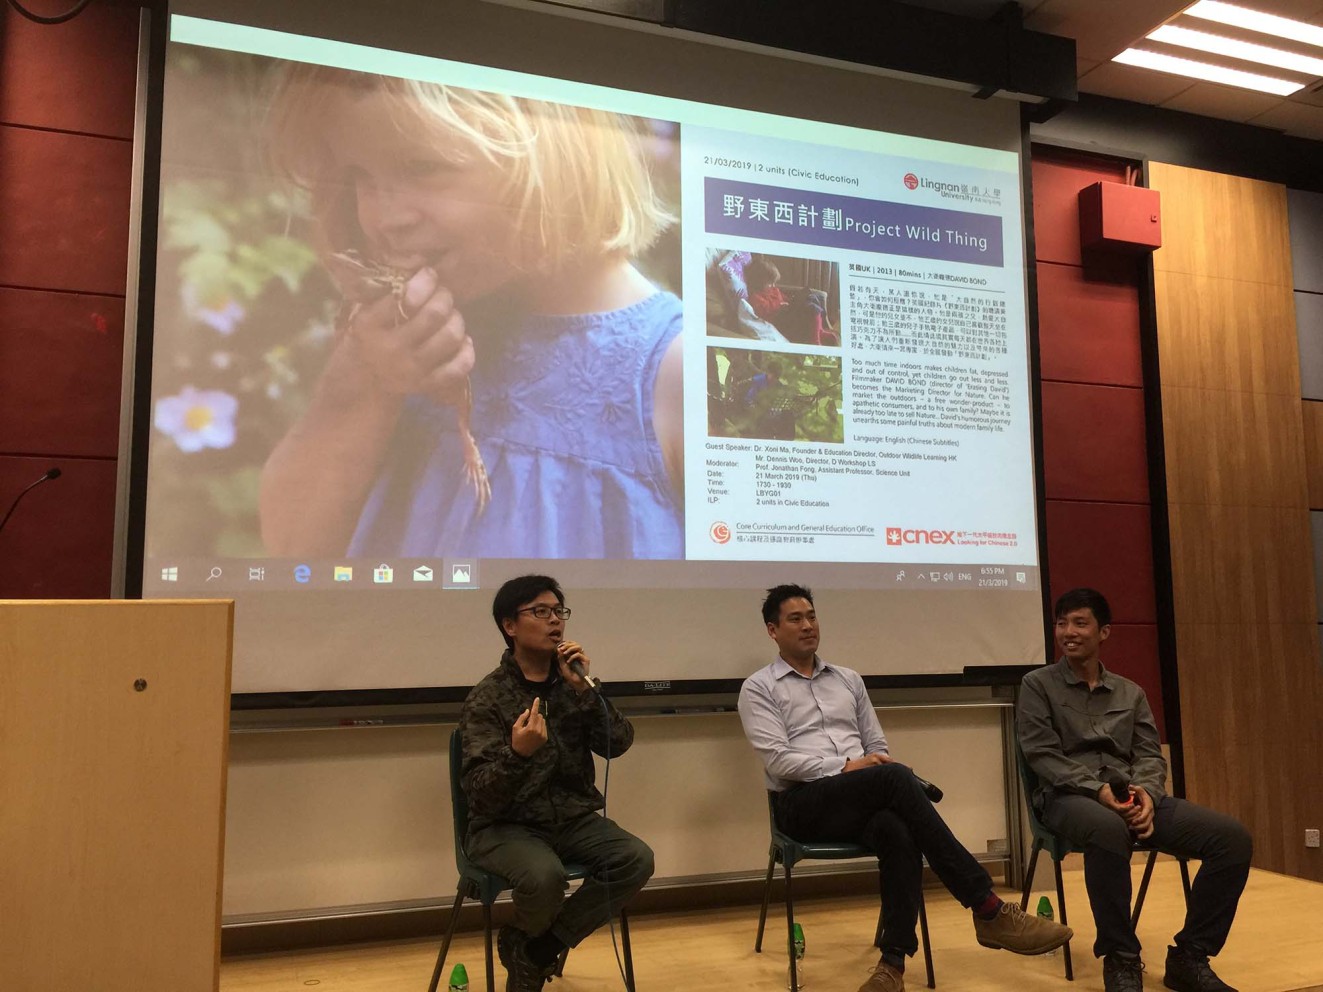 Prof Jonathan FONG (middle) hosts the after-screening discussion together with two hiking enthusiasts.